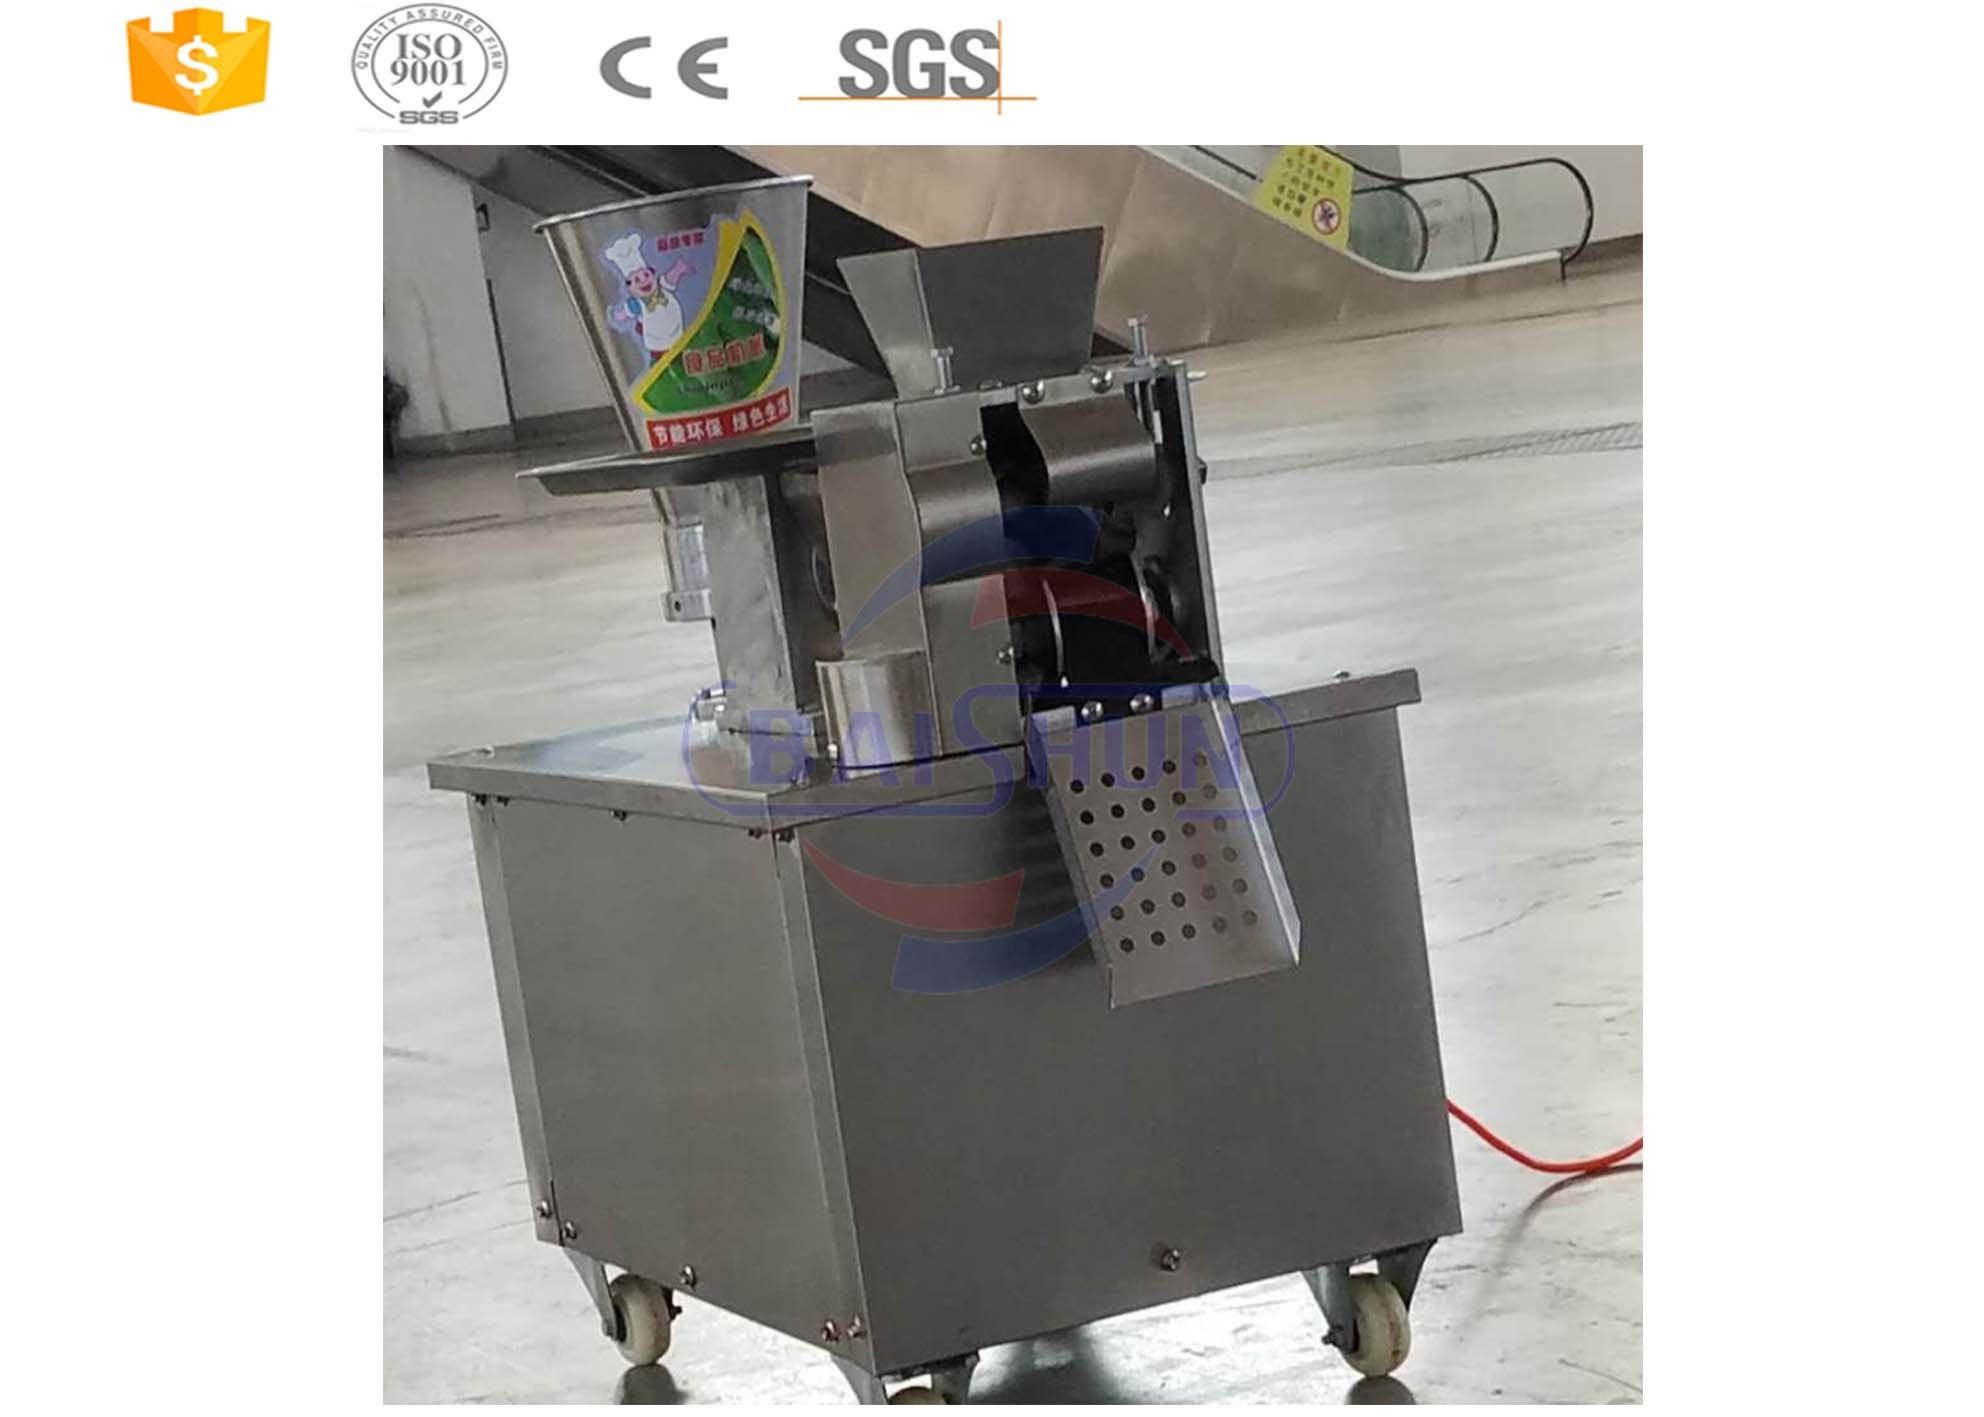 Buy cheap High Speed Industrial Food Machinery Small Dumpling Machine For Restaurants / from wholesalers